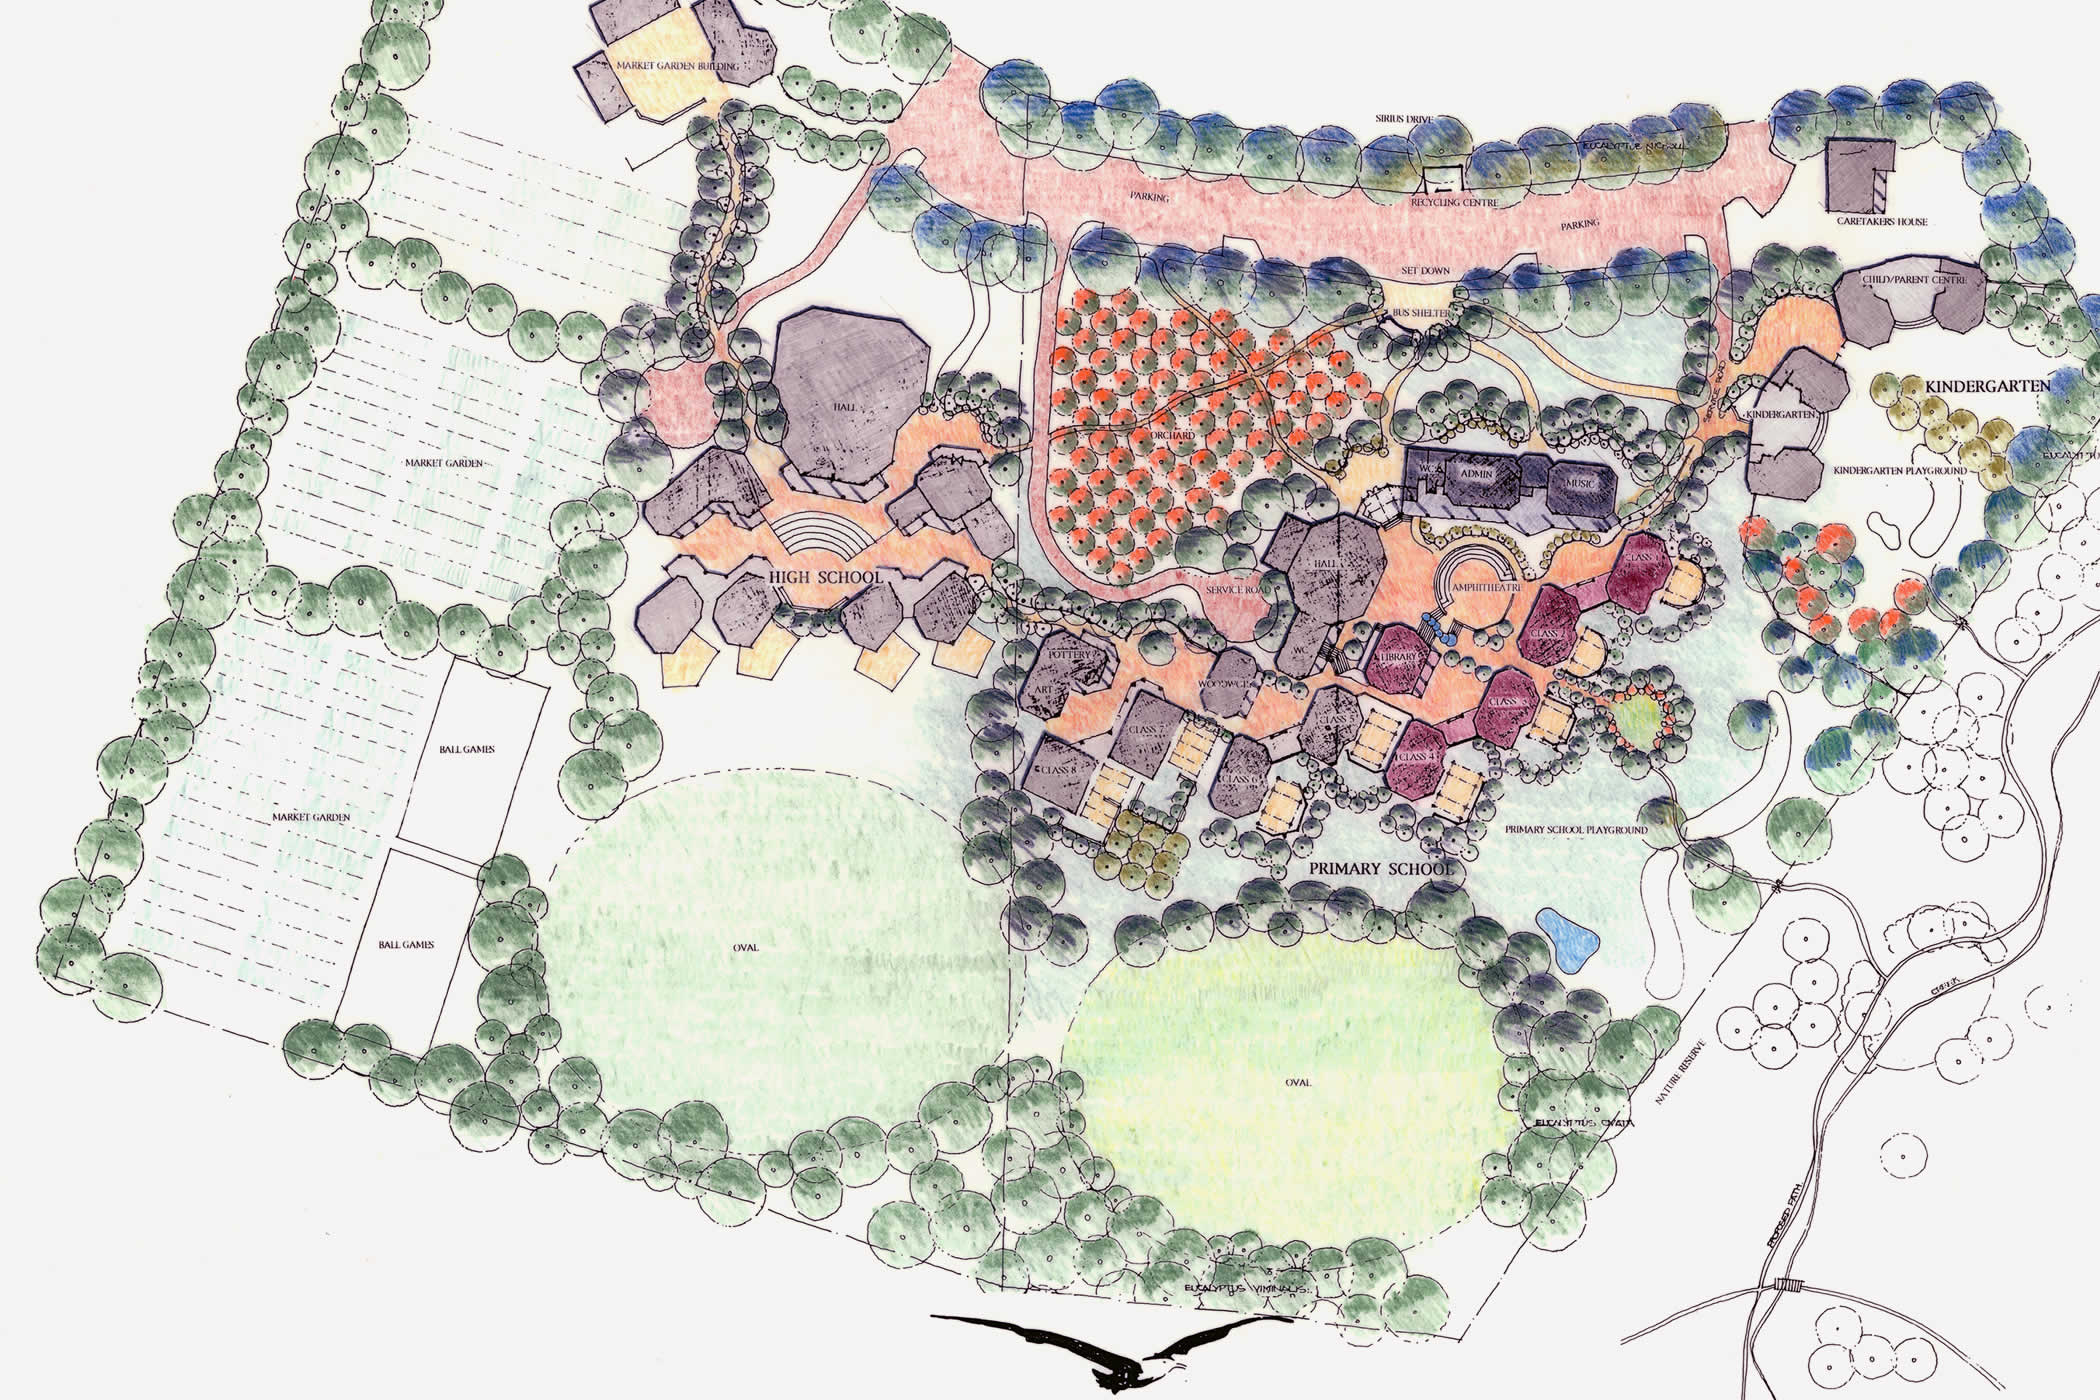 Tarremah Steiner School, Huntingfield, Tasmania master plan: Phased growth included an Early Childhood Centre, Primary, Middle and High School learning areas, a library, music room and multi-purpose Hall, and year 10 art and science learning areas.